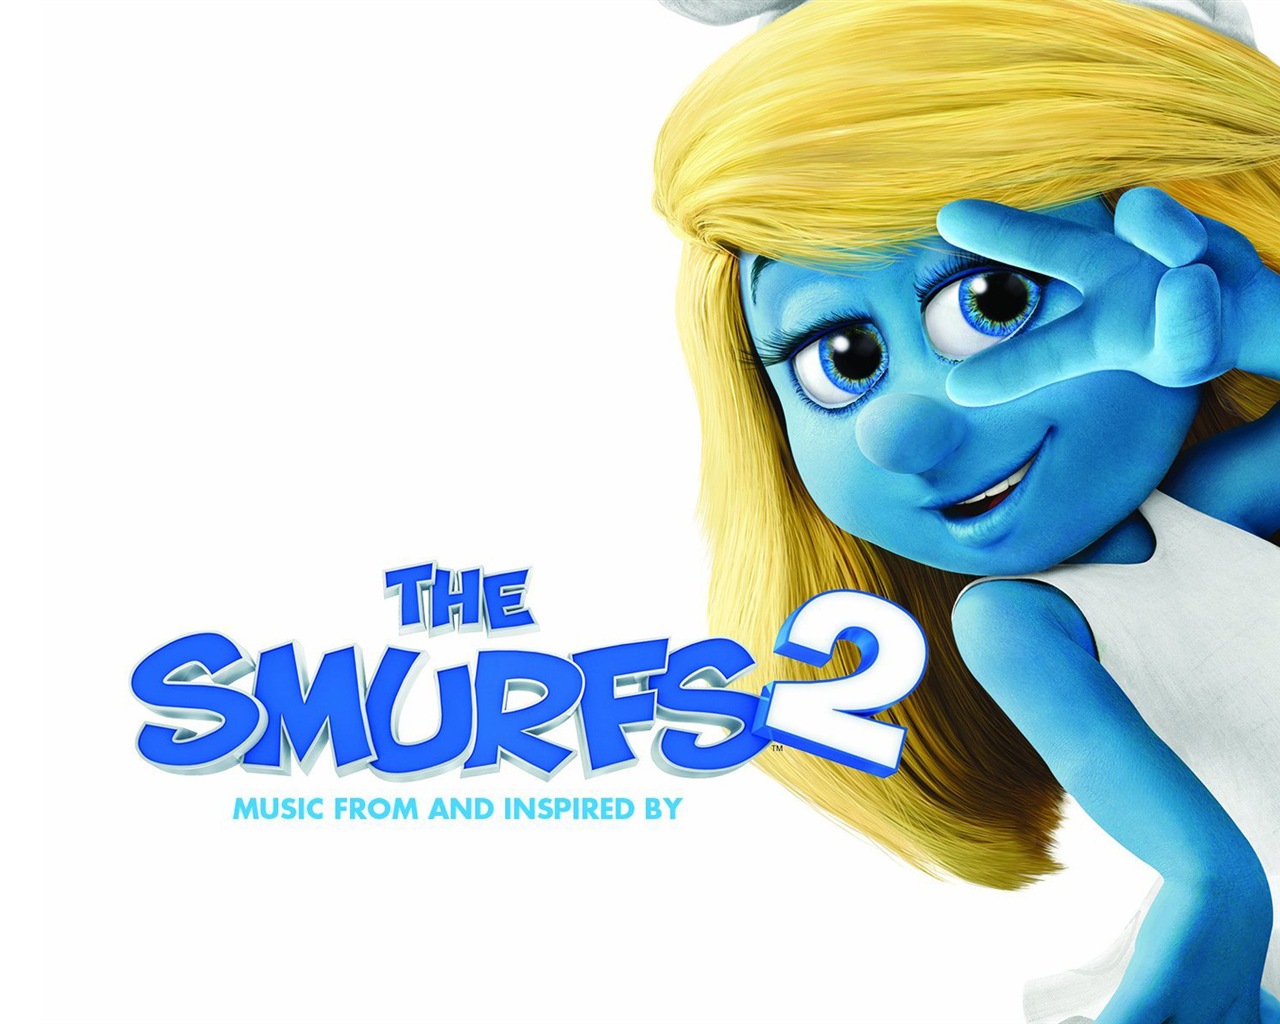 The Smurfs 2 HD movie wallpapers #4 - 1280x1024